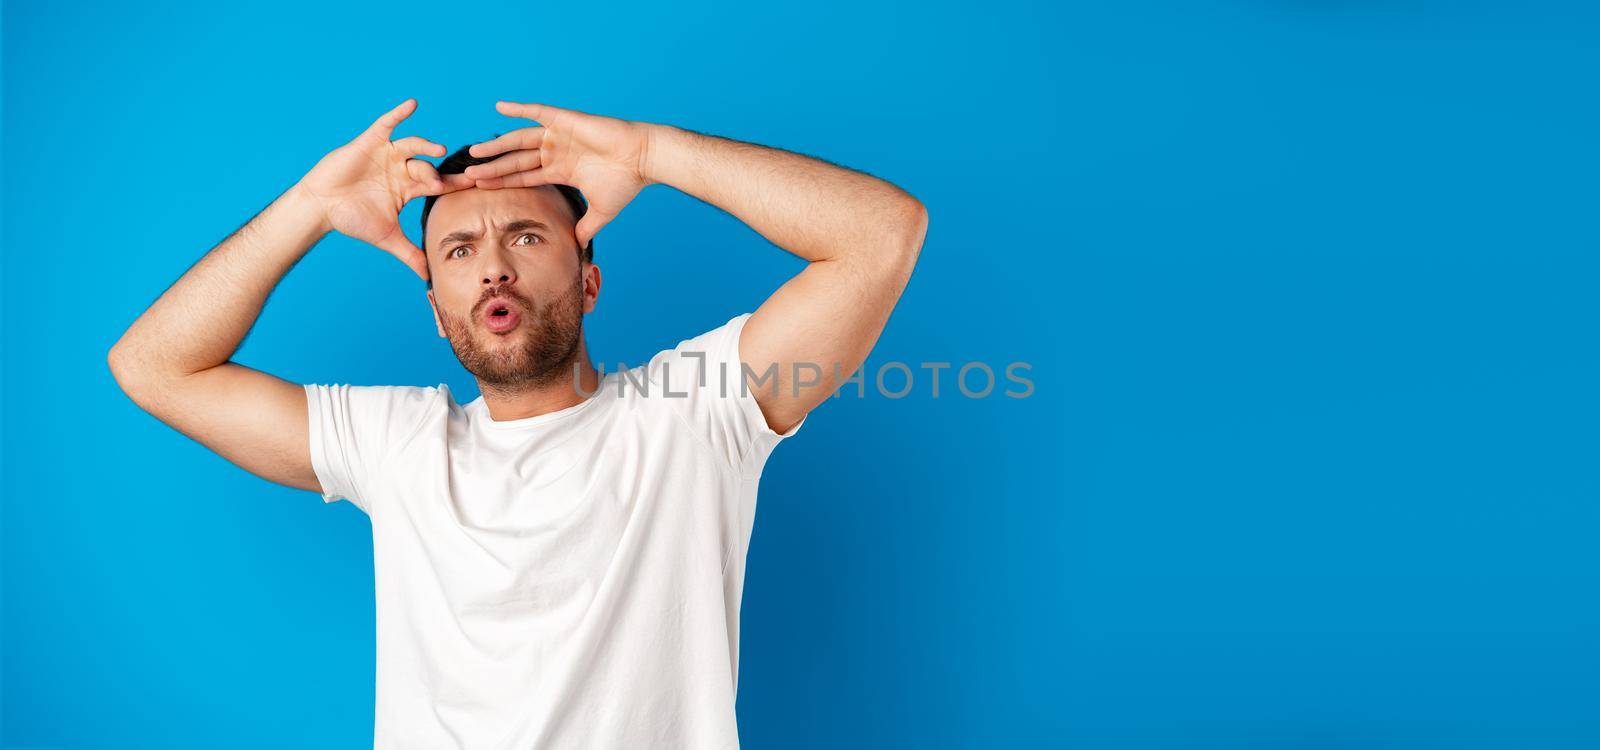 Portrait of a confused young man holding hands on his head over blue background, close up